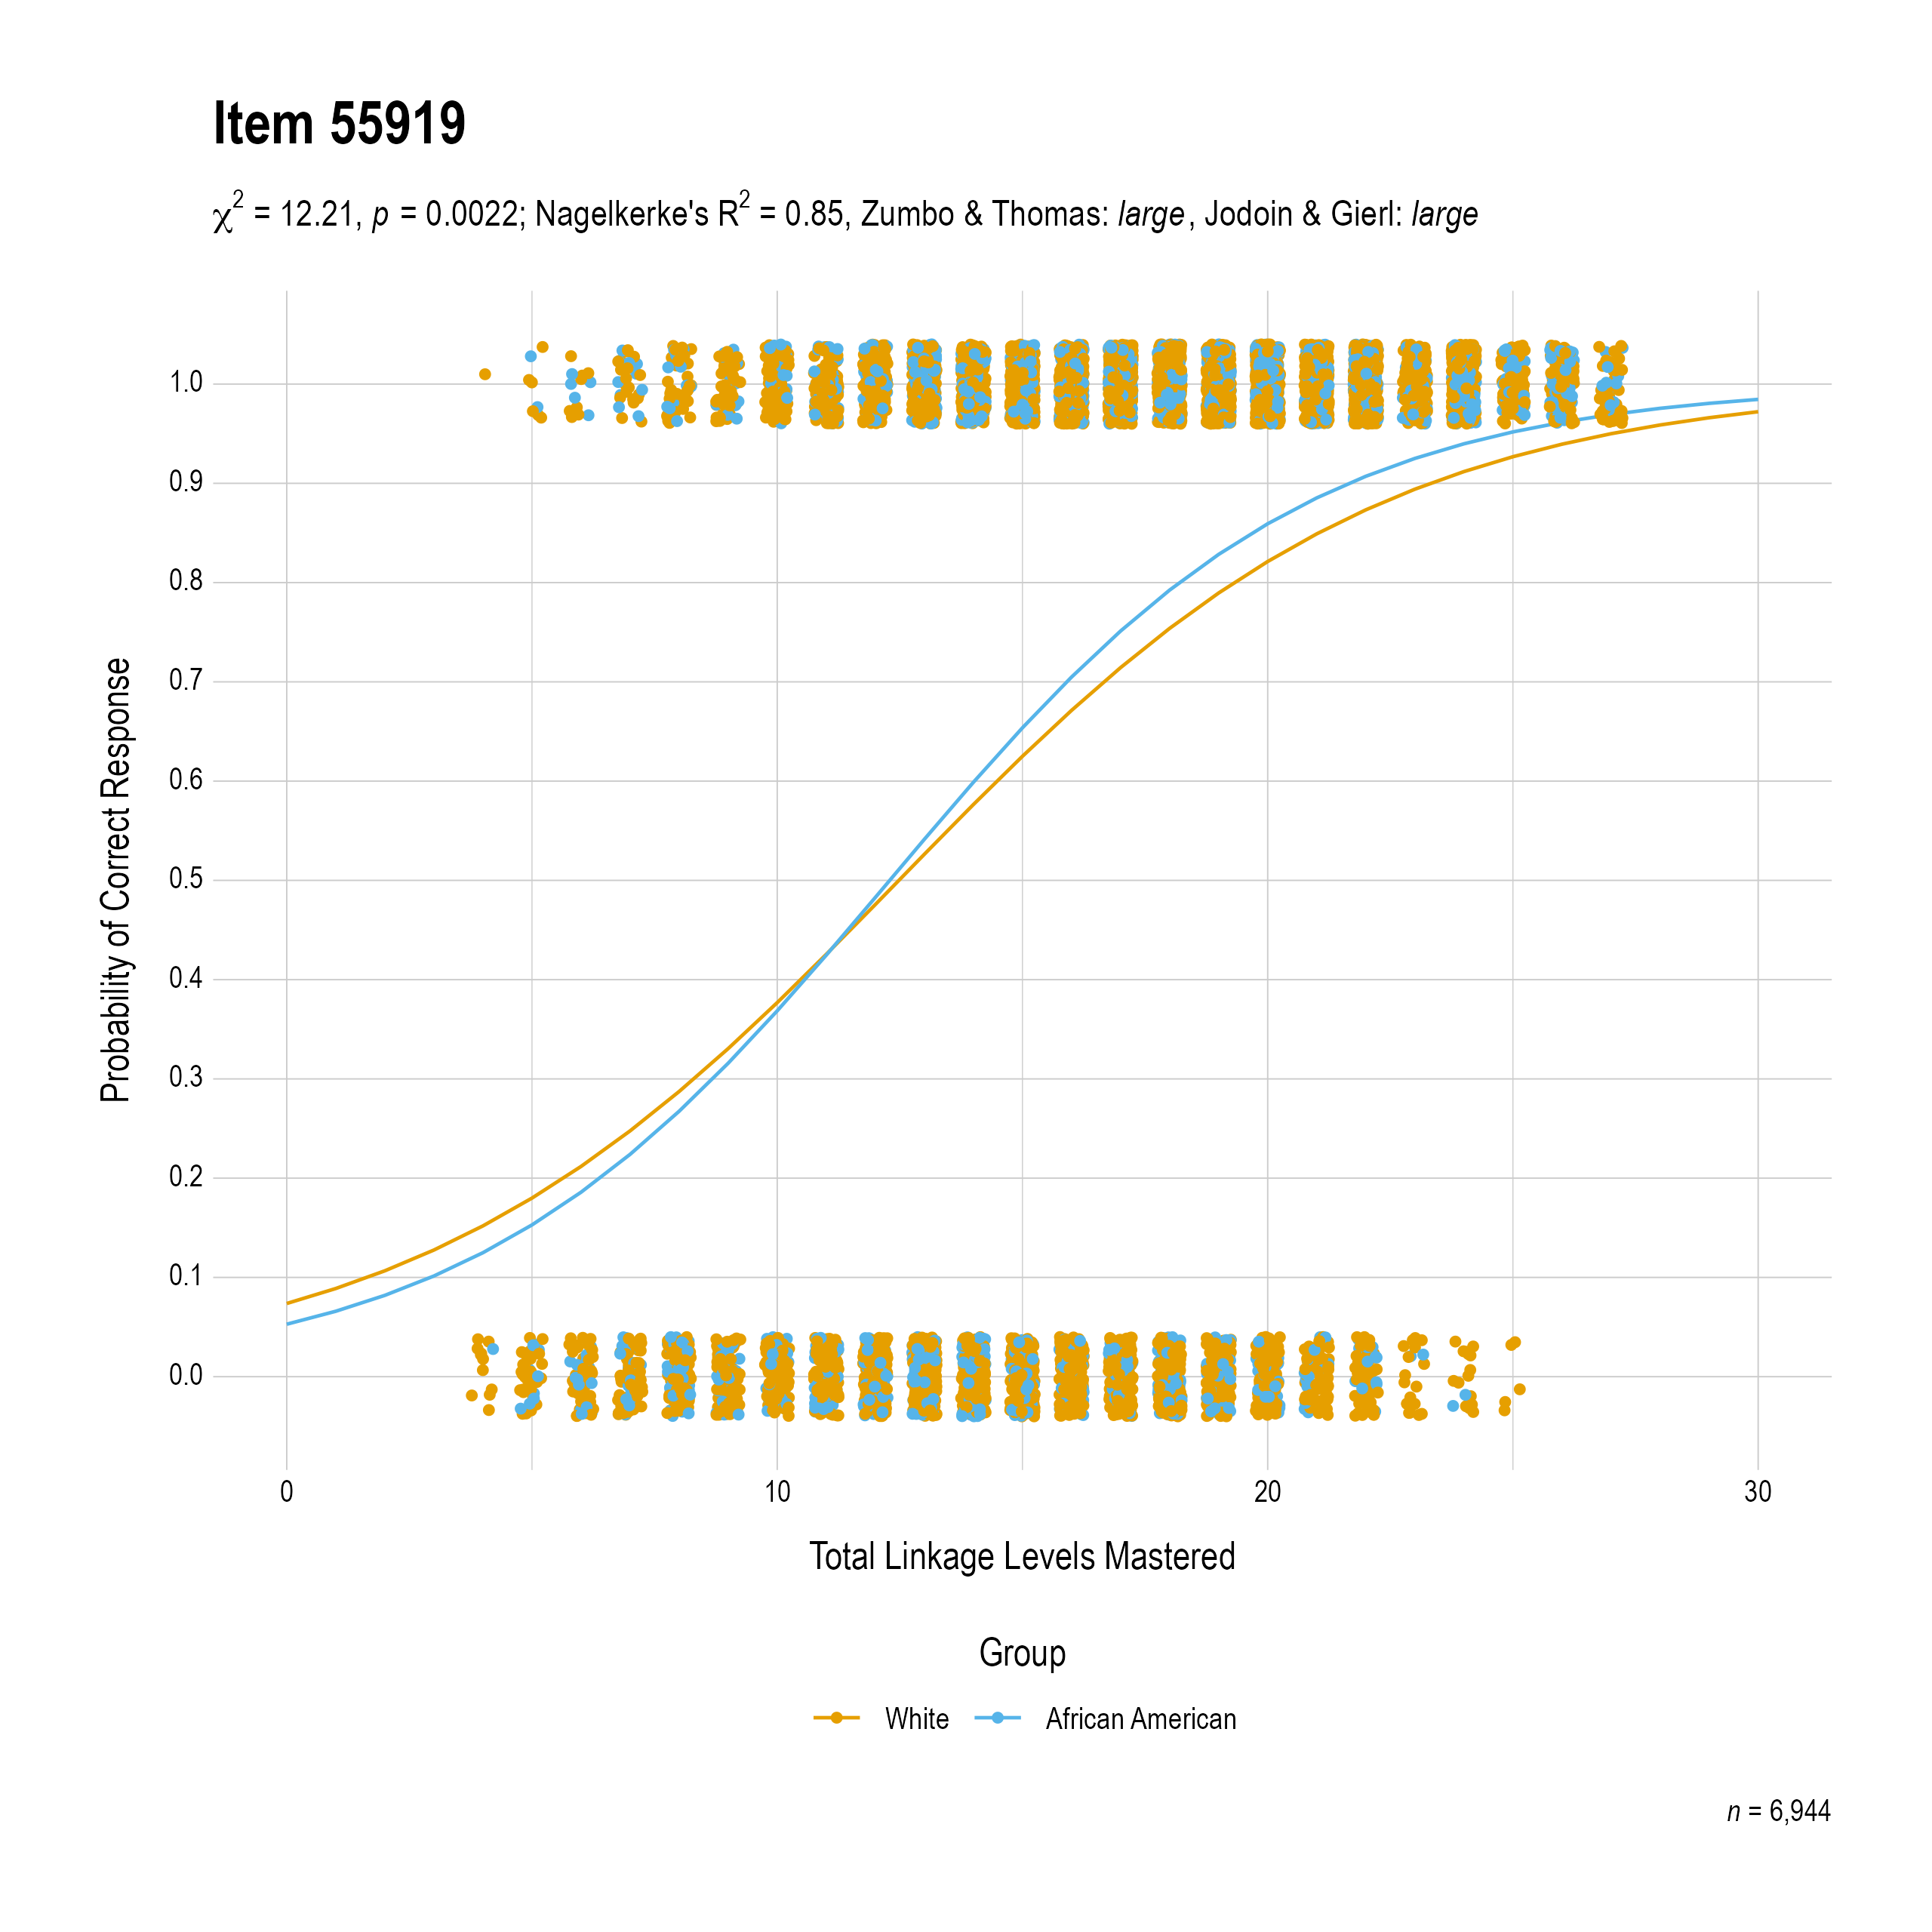 The plot of the combined race differential item function evidence for Science item 55919. The figure contains points shaded by group. The figure also contains a logistic regression curve for each group. The total linkage levels mastered in is on the x-axis, and the probability of a correct response is on the y-axis.